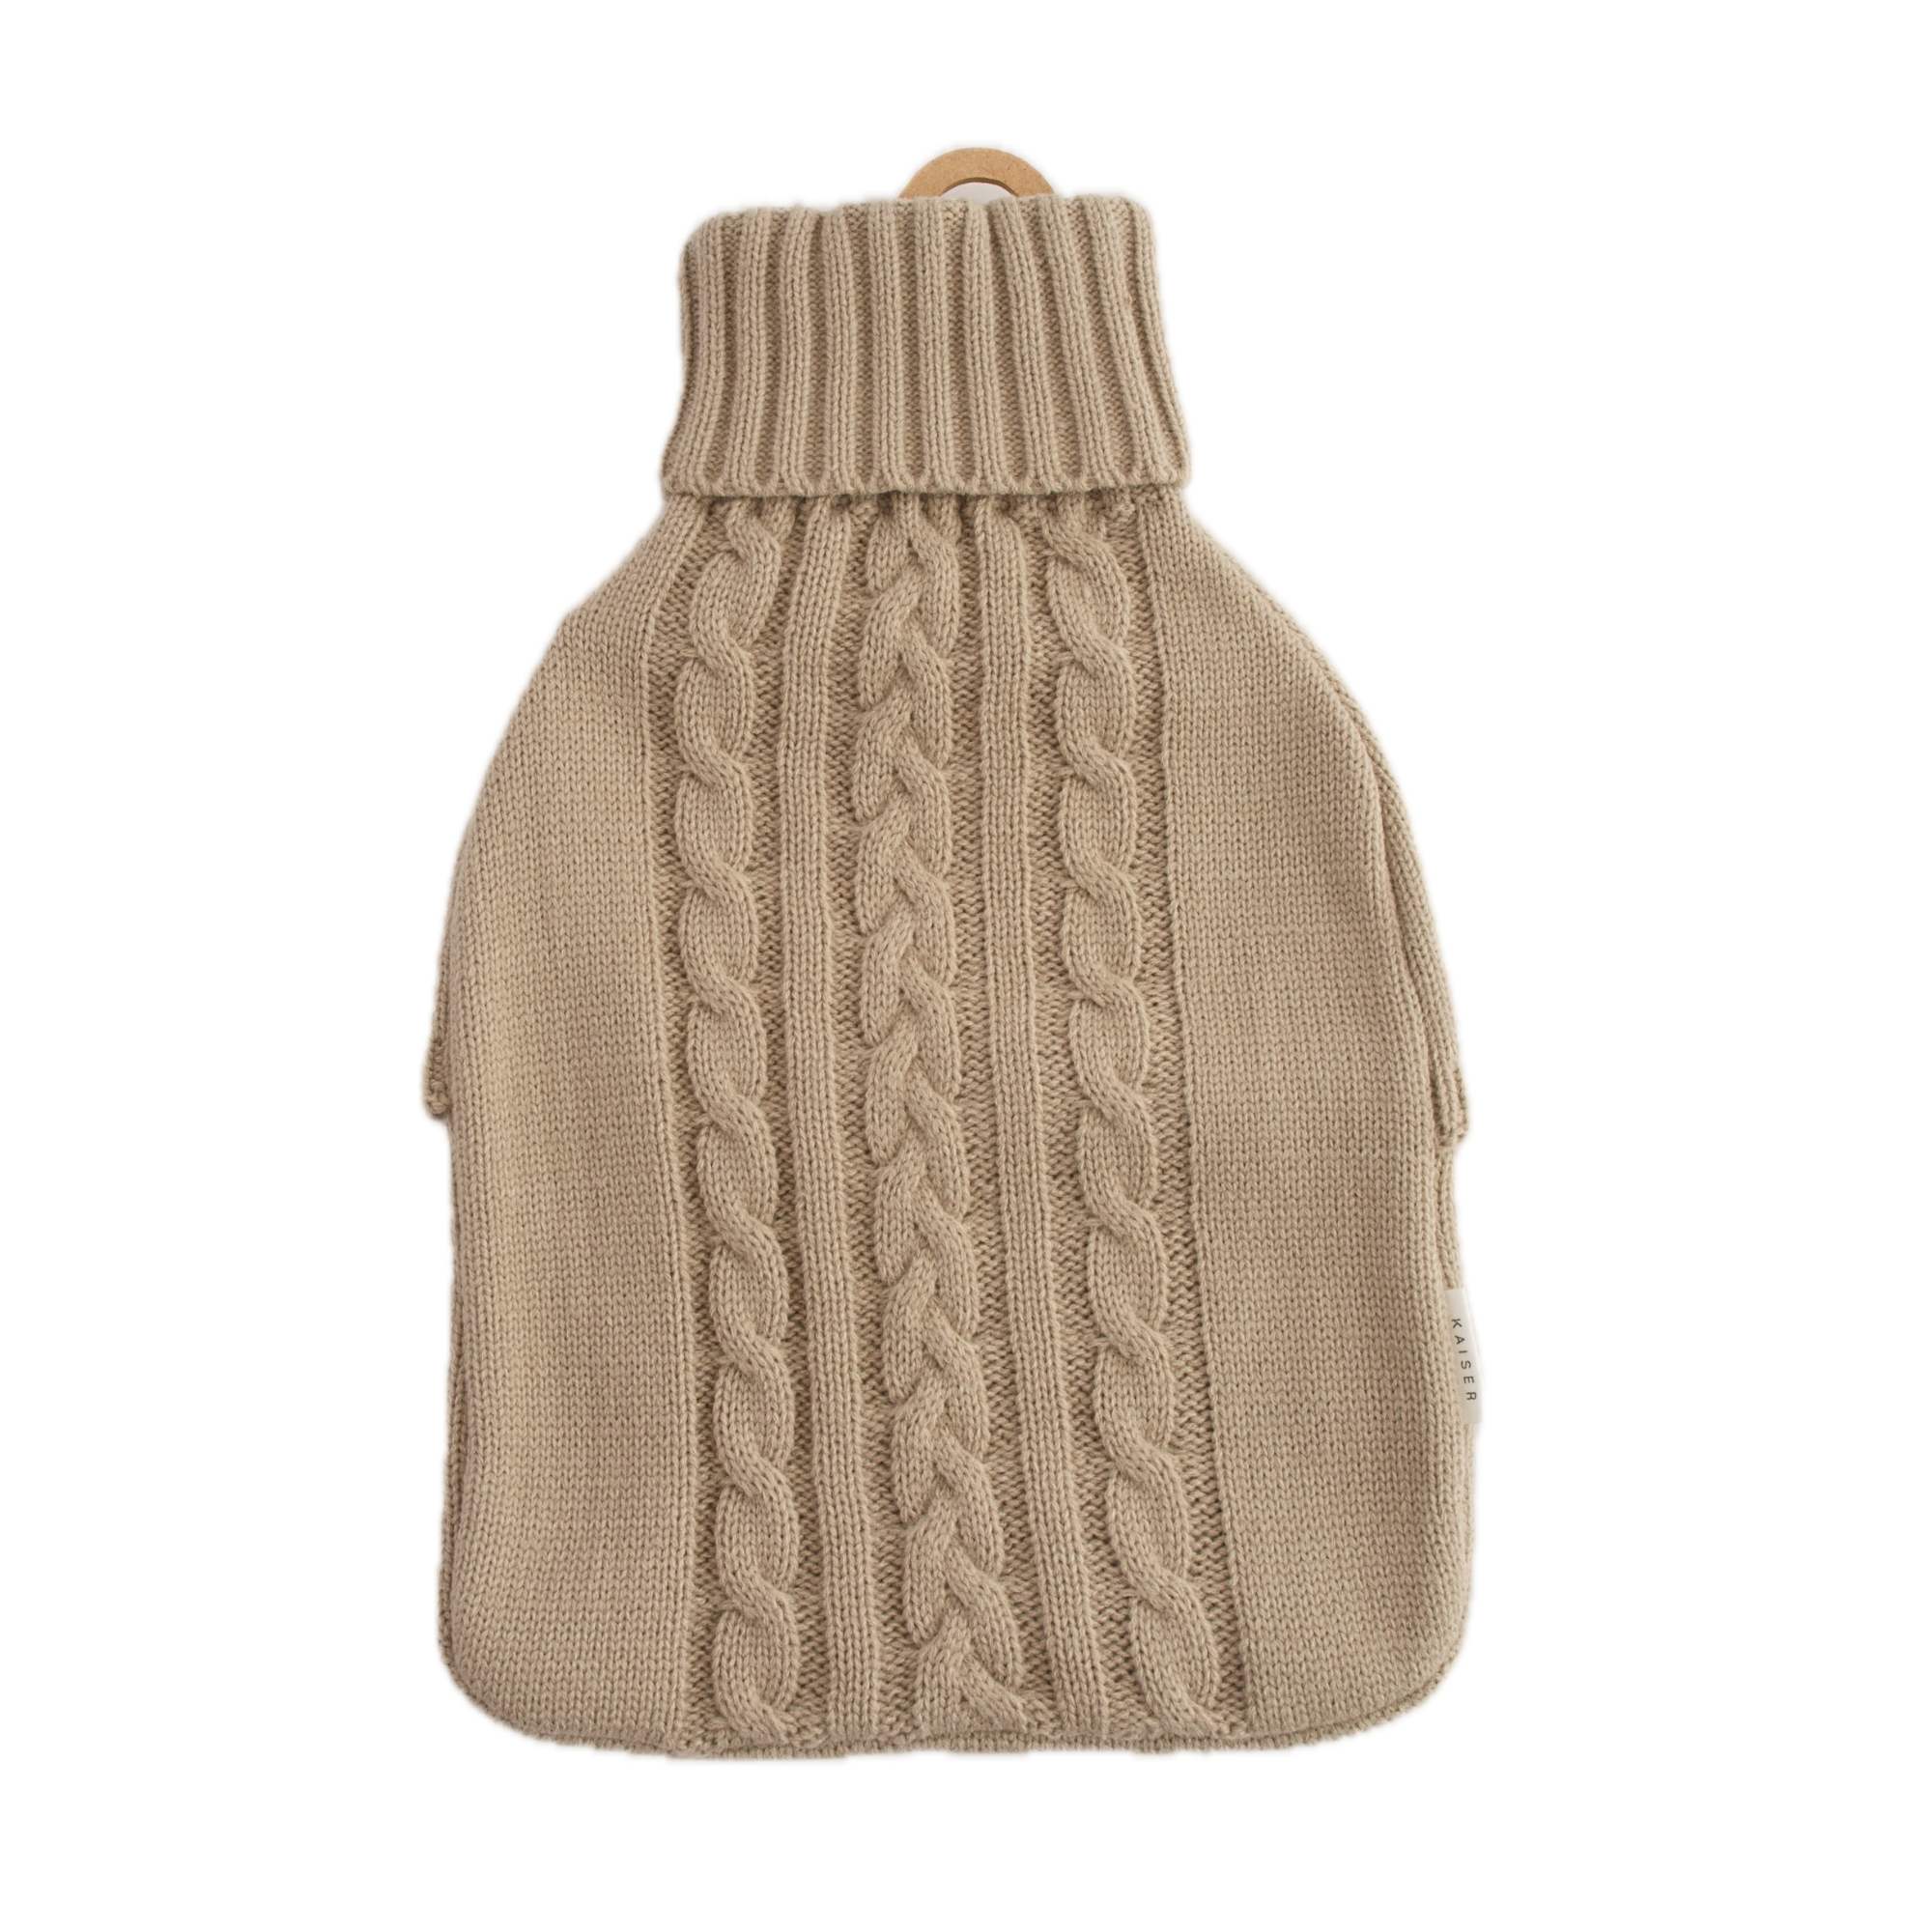 Knitted Hot Water Bottle Cover - Latte